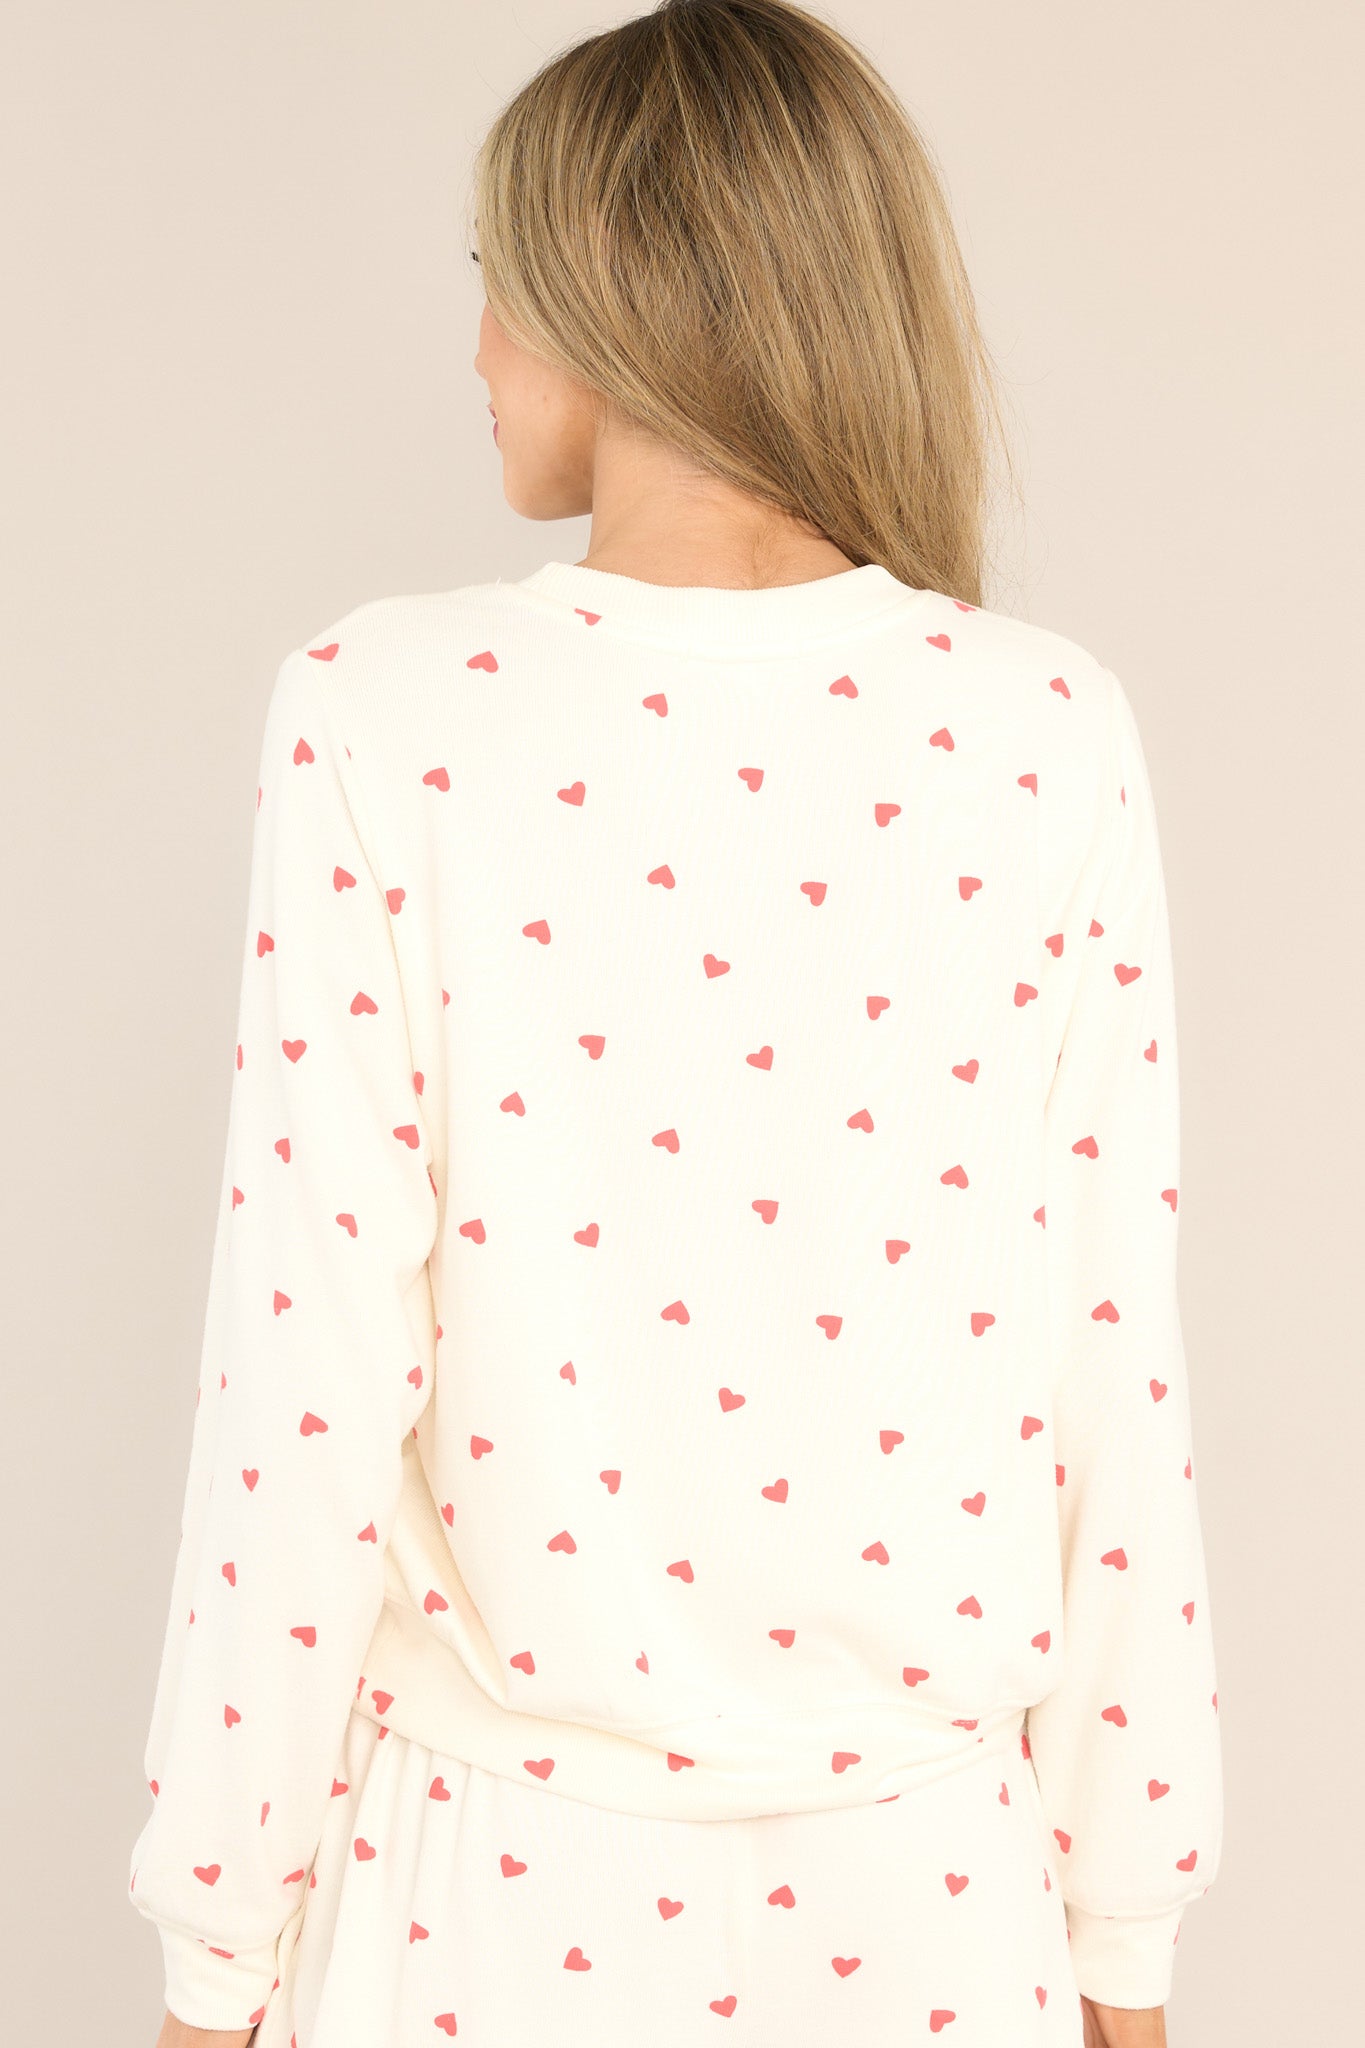 Back view of this top that features a ribbed crew neckline, an all-over festive print, cuffed long sleeves, and a cuffed hemline.